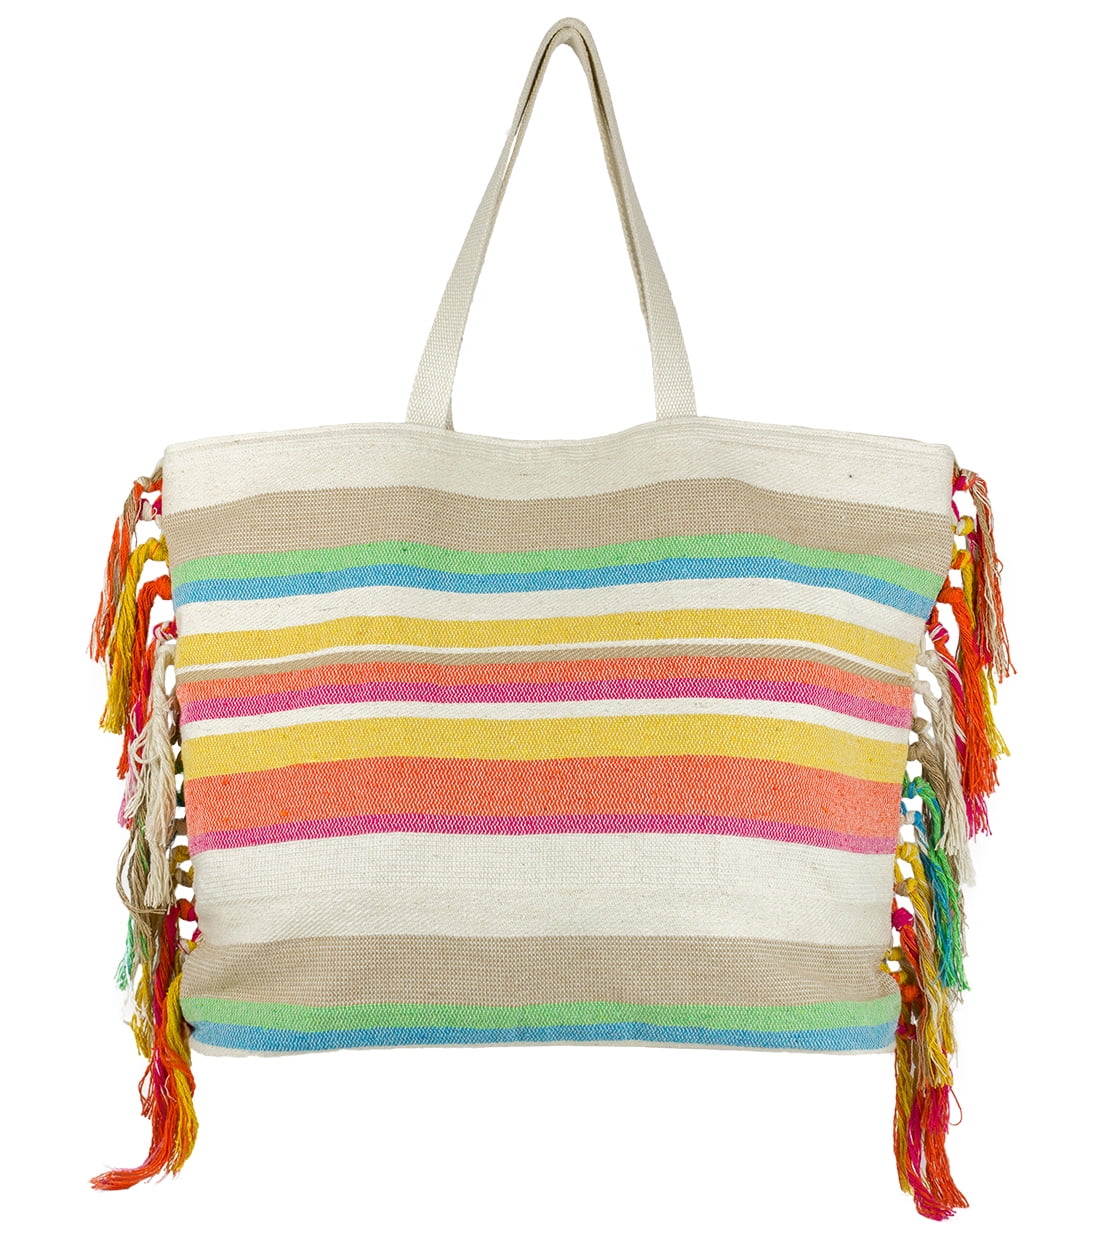 Magid Women's Beach Tote with Side Fringes - Walmart.com